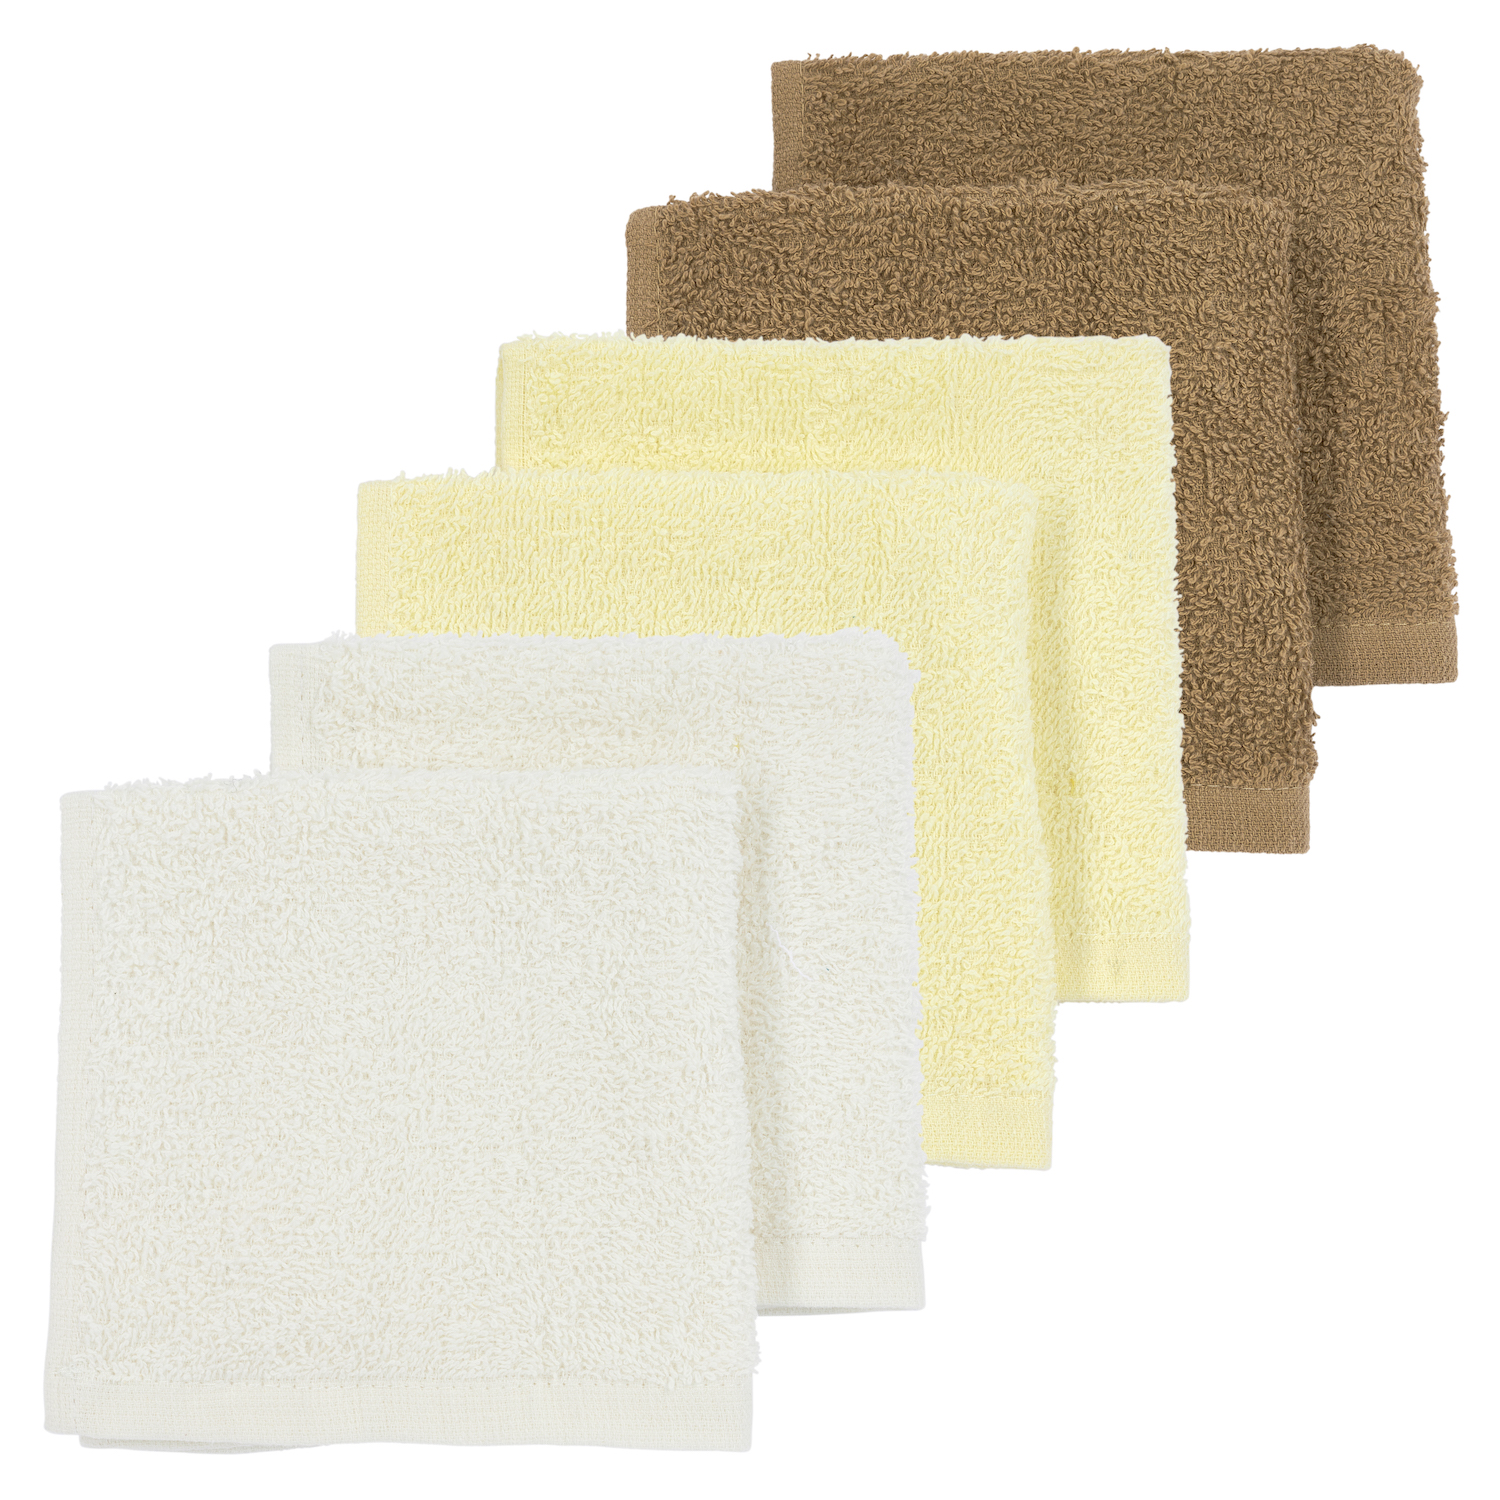 Facecloth 6-pack terry Uni - offwhite/soft yellow/toffee - 30x30cm